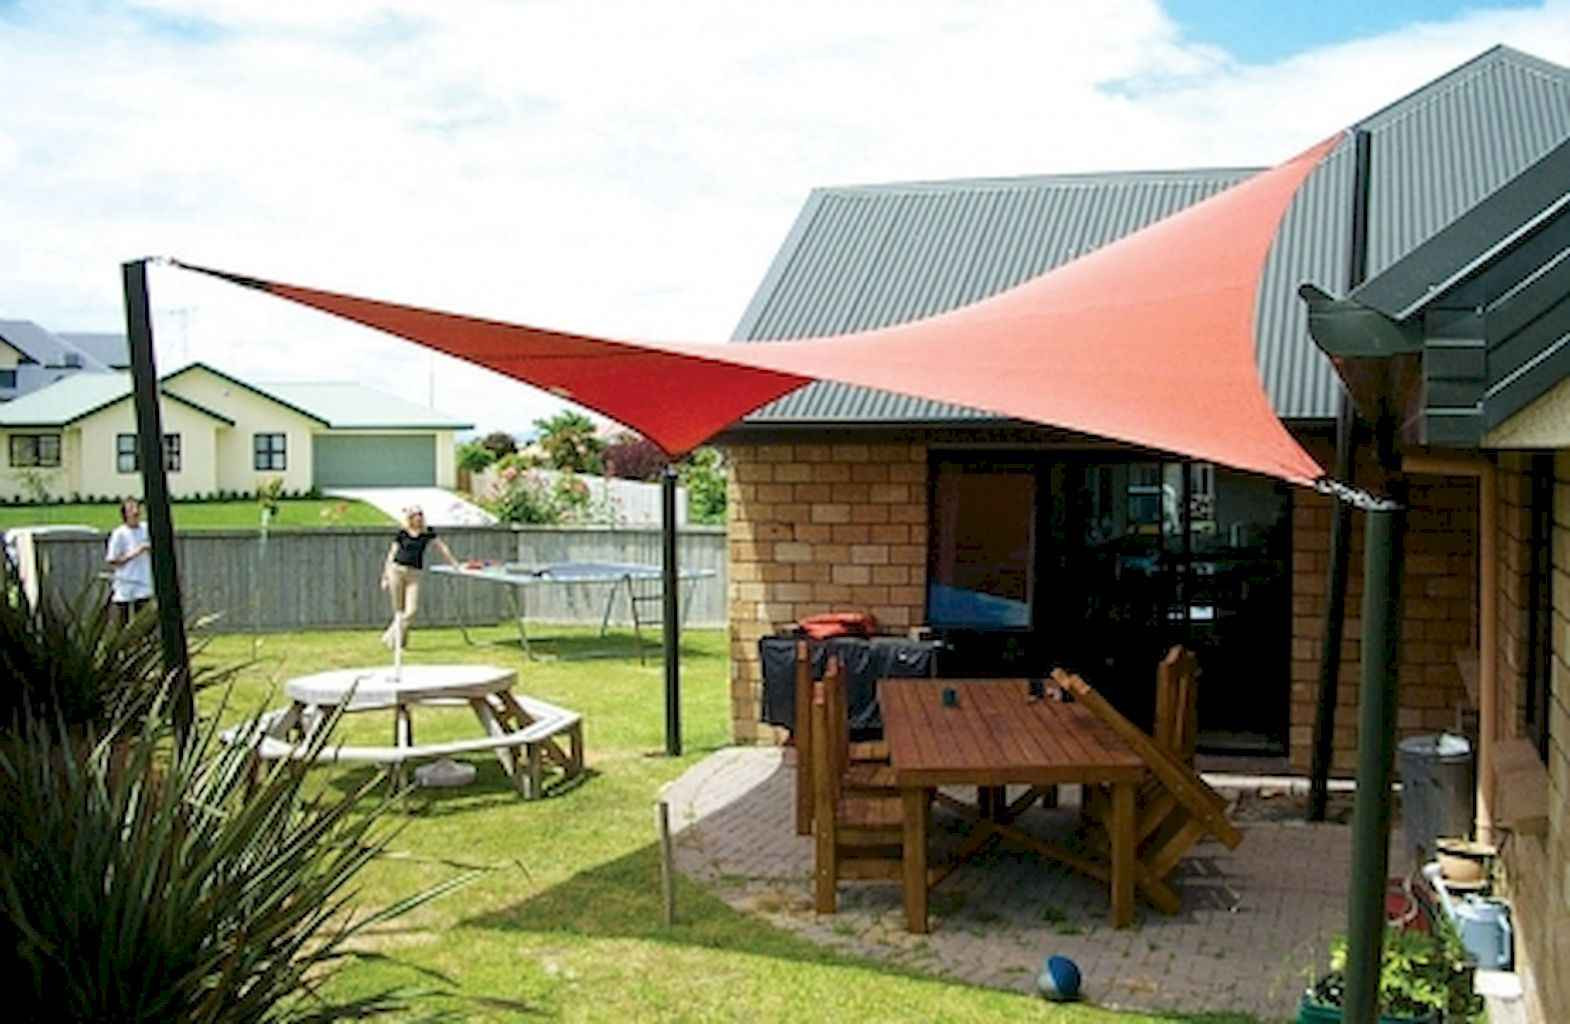 DIY Outdoor Shade Canopy
 35 Clever DIY Canopy Shade for The Yard or Patio Ideas